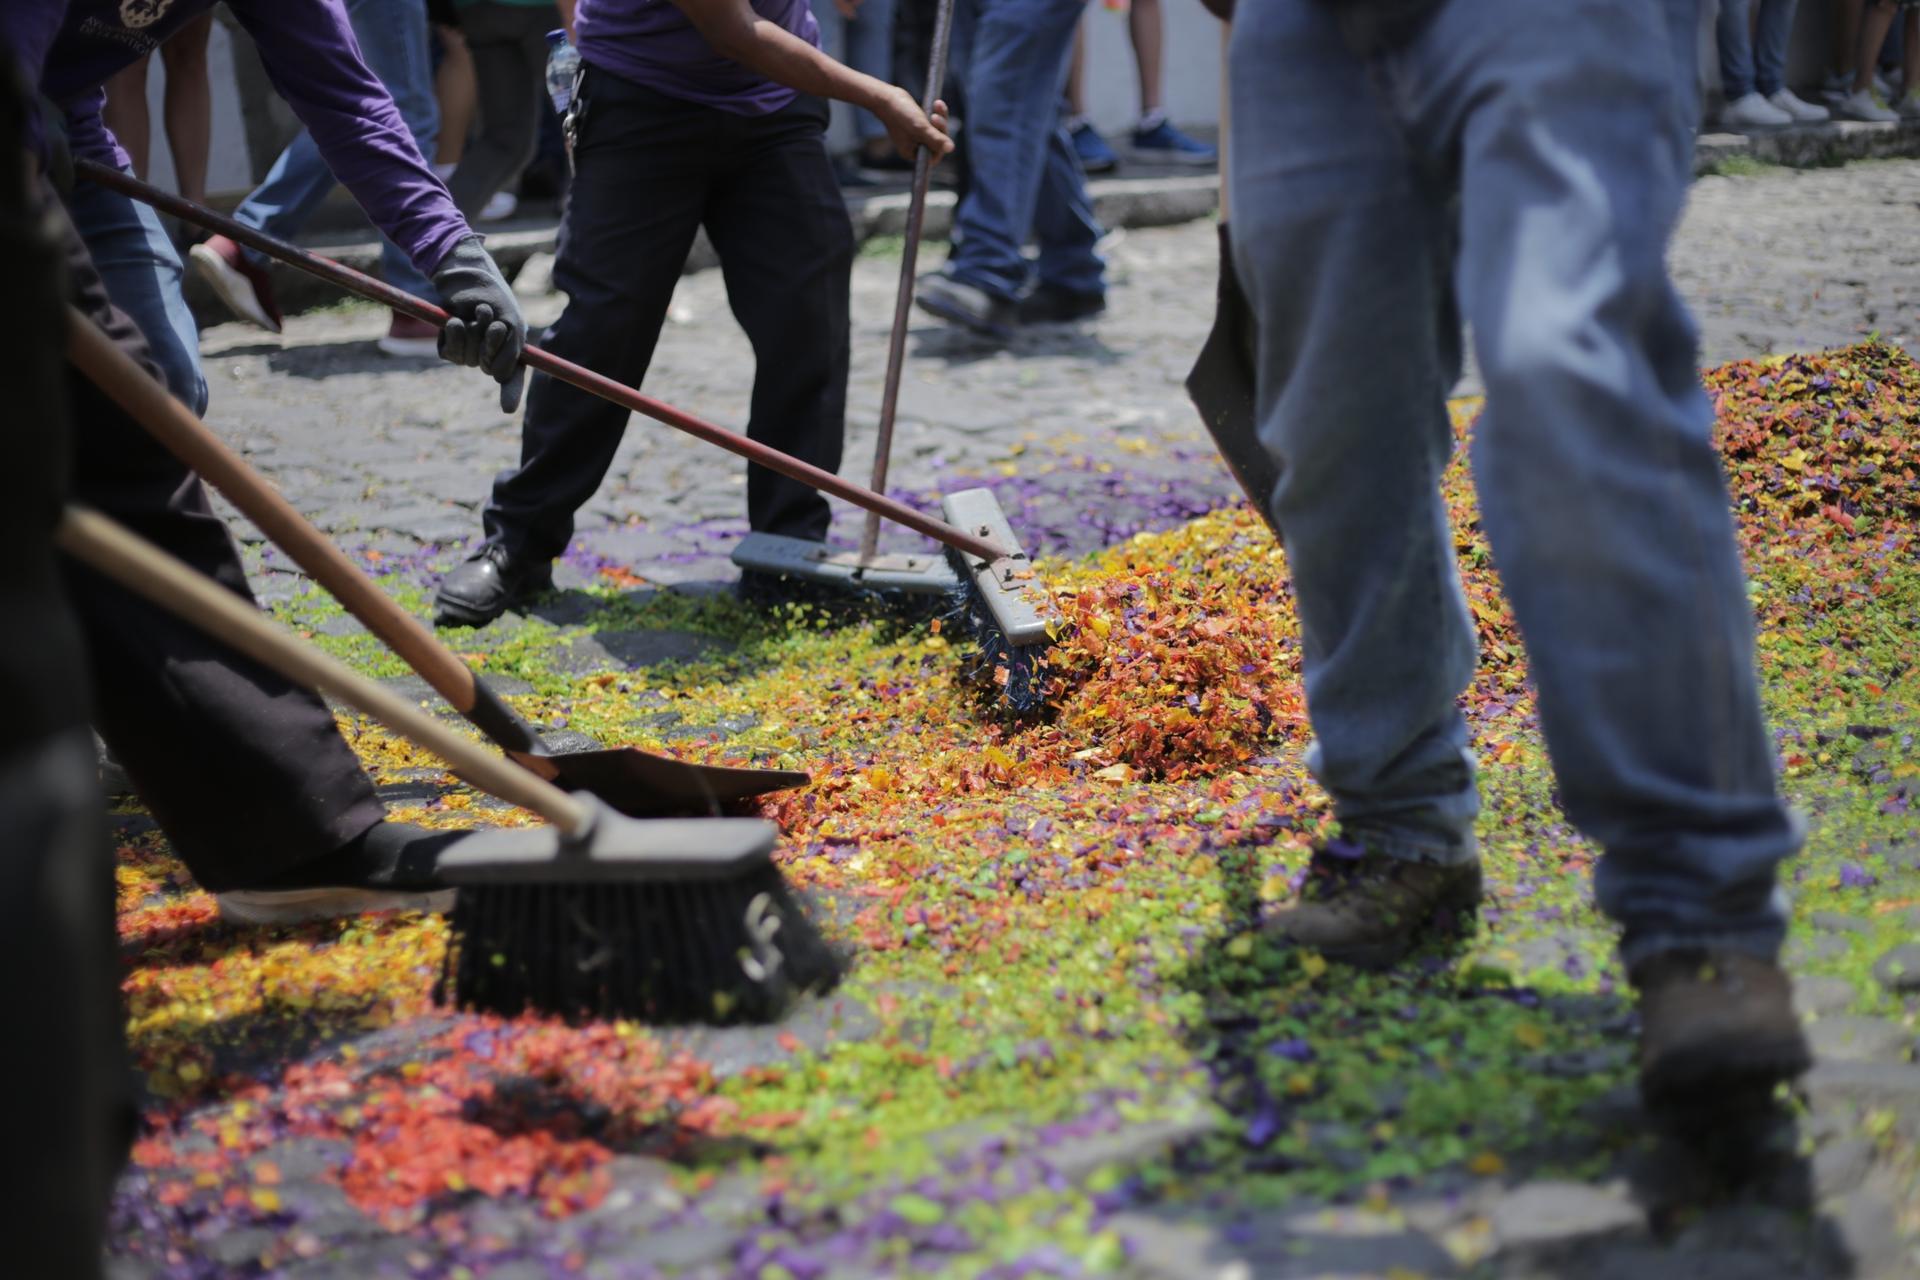 A cleaning crew picks up the remains of an alfombra following a Holy Week procession.